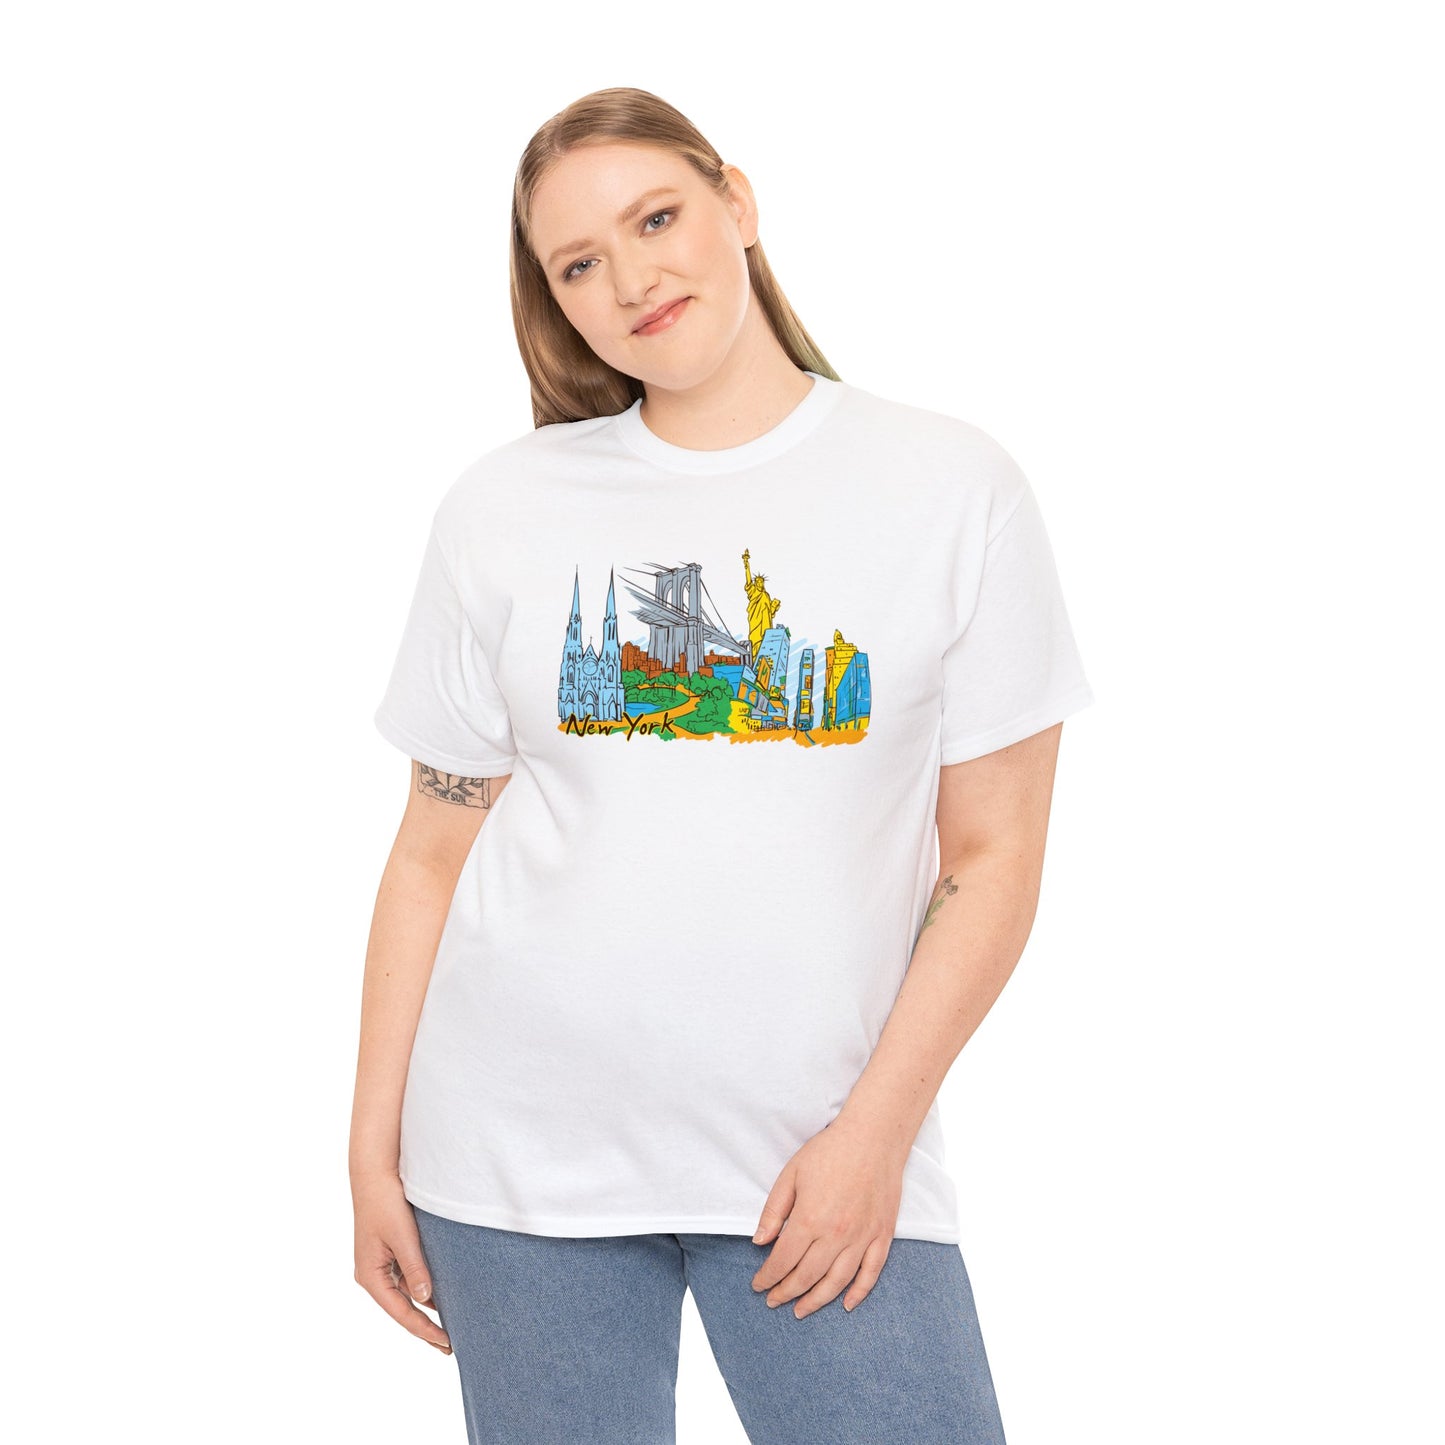 Exclusive New York City T-Shirt - A Perfect Blend of Comfort and Urban Chic!